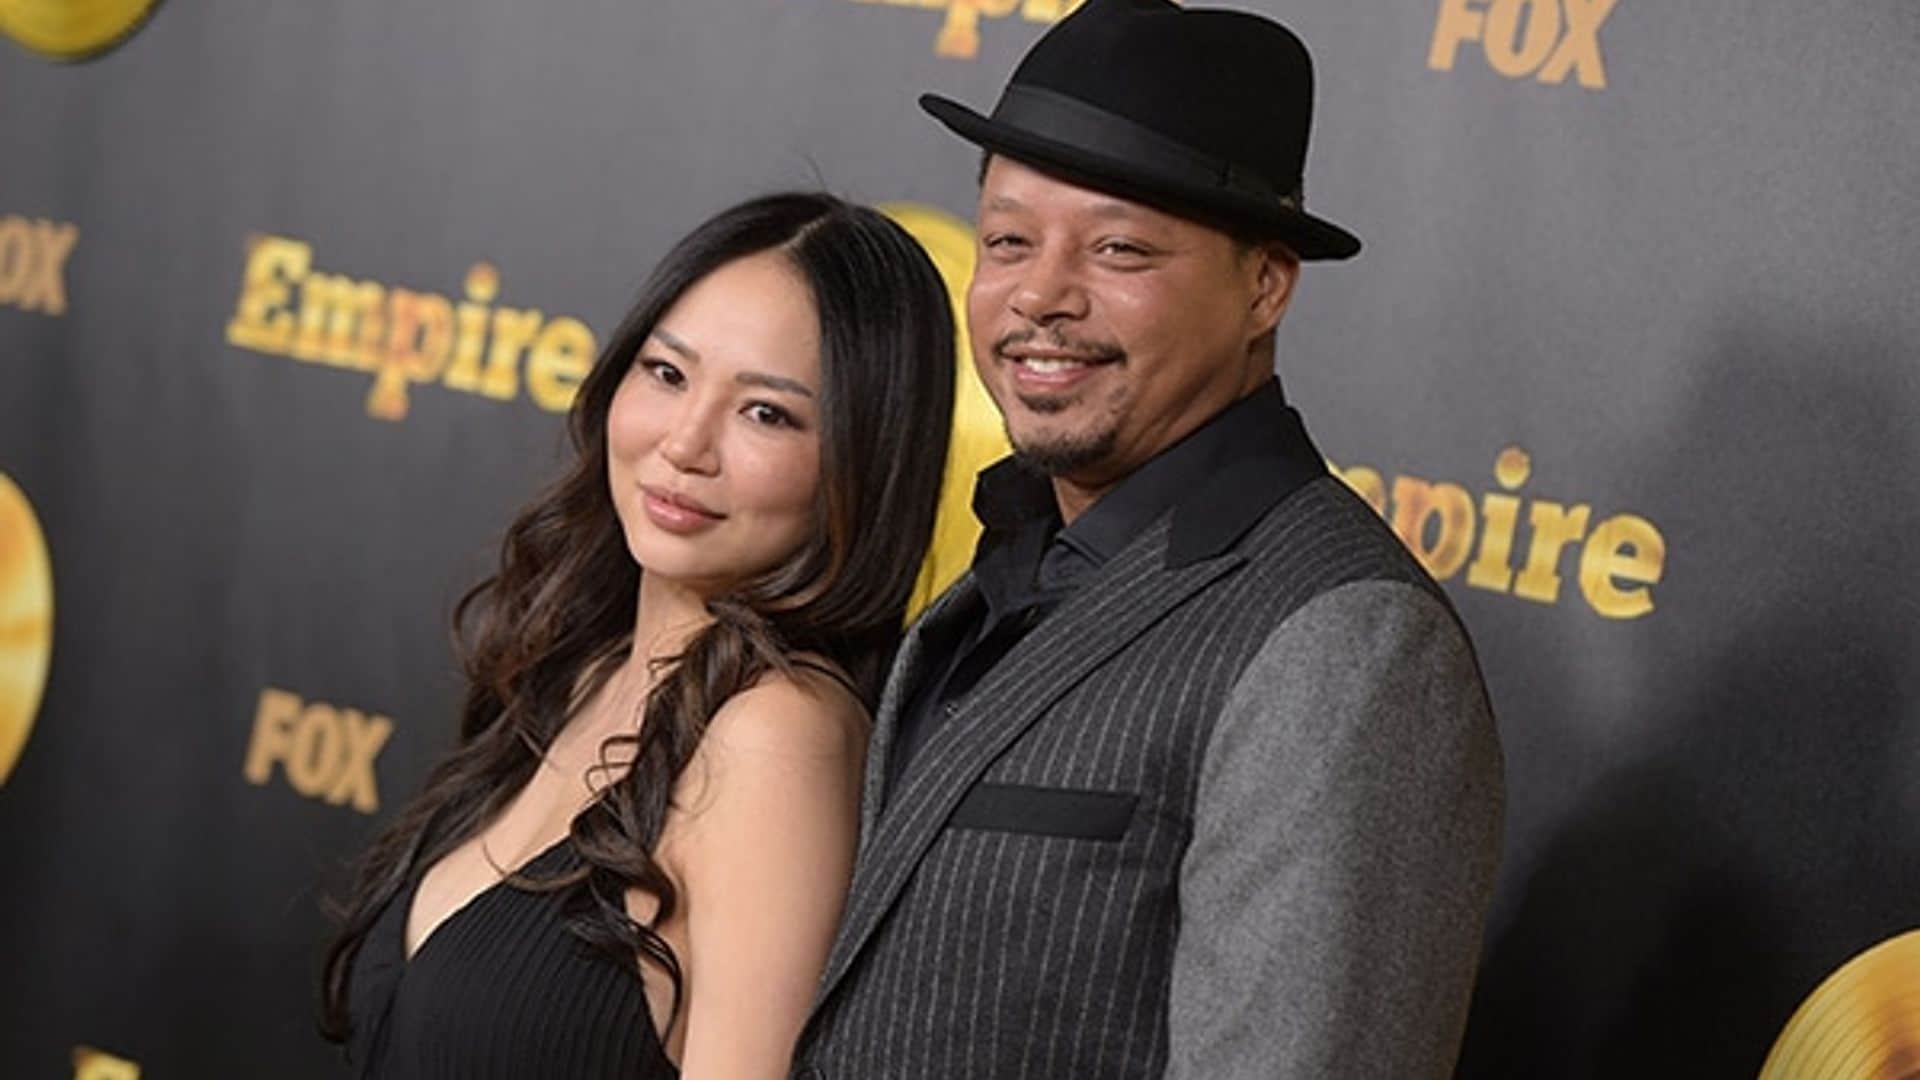 'Empire' star Terrence Howard welcomes a son